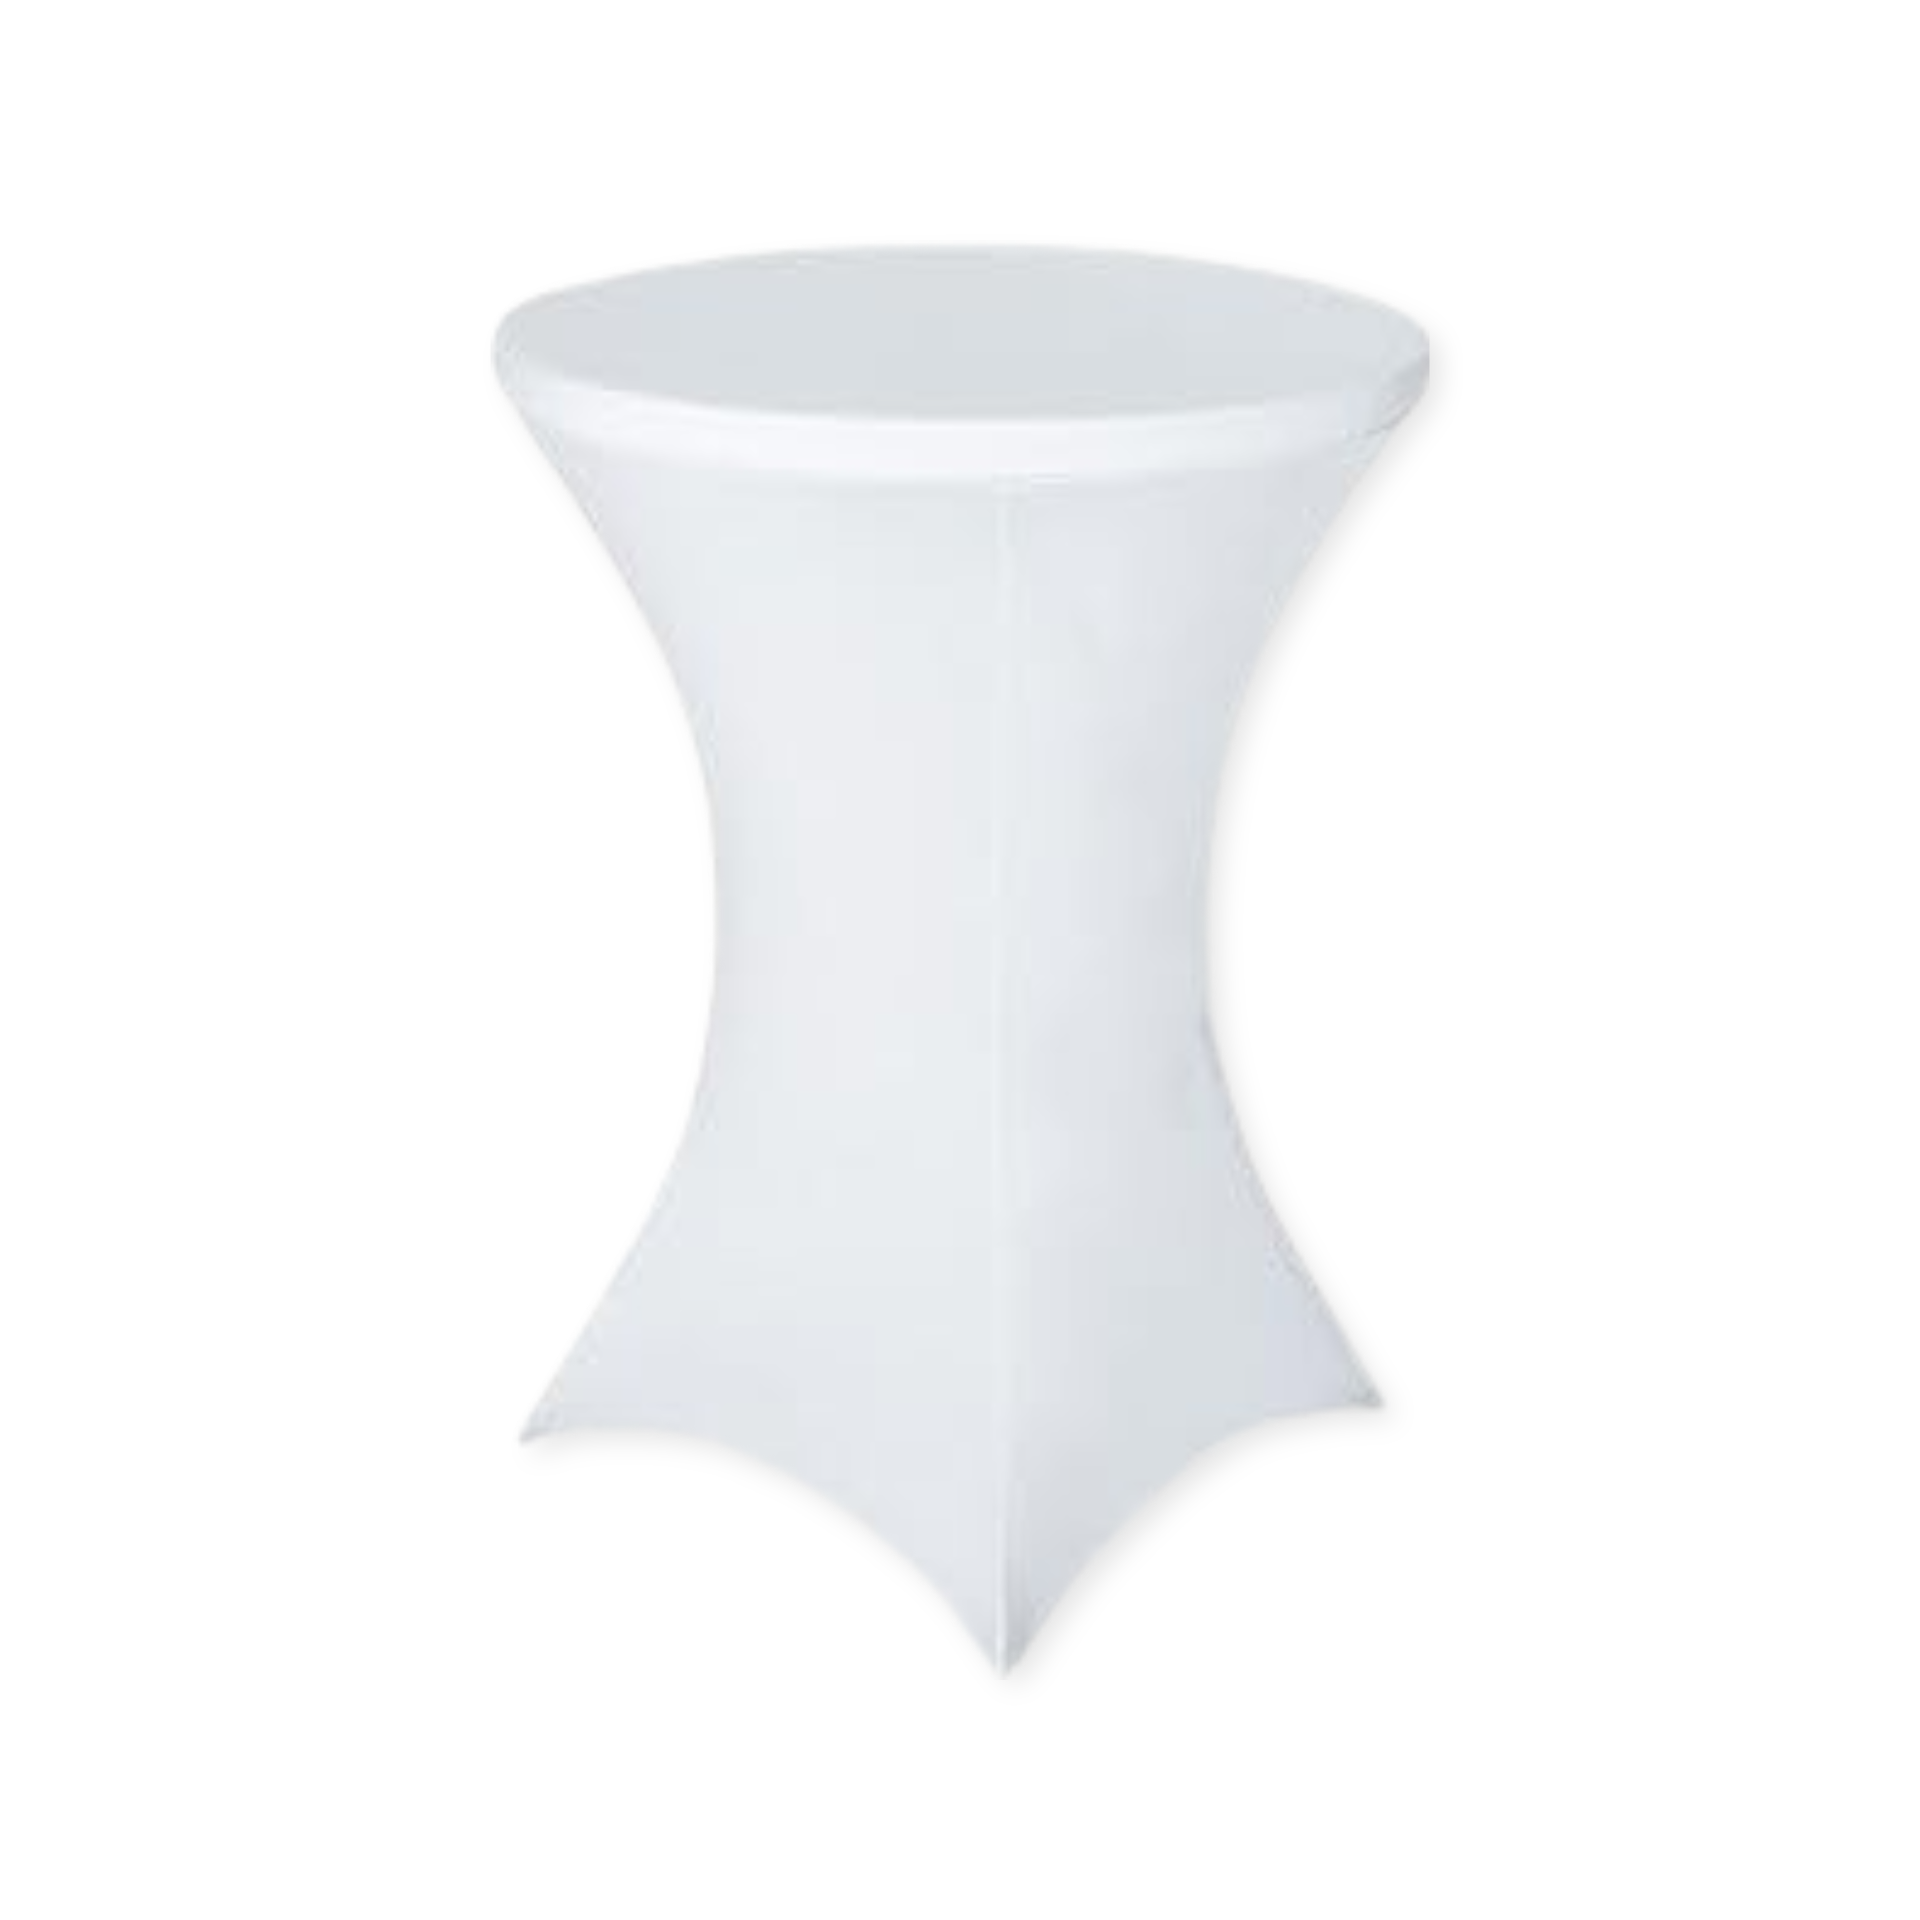 Spandex white round cocktail table panama city beach wedding party event rental